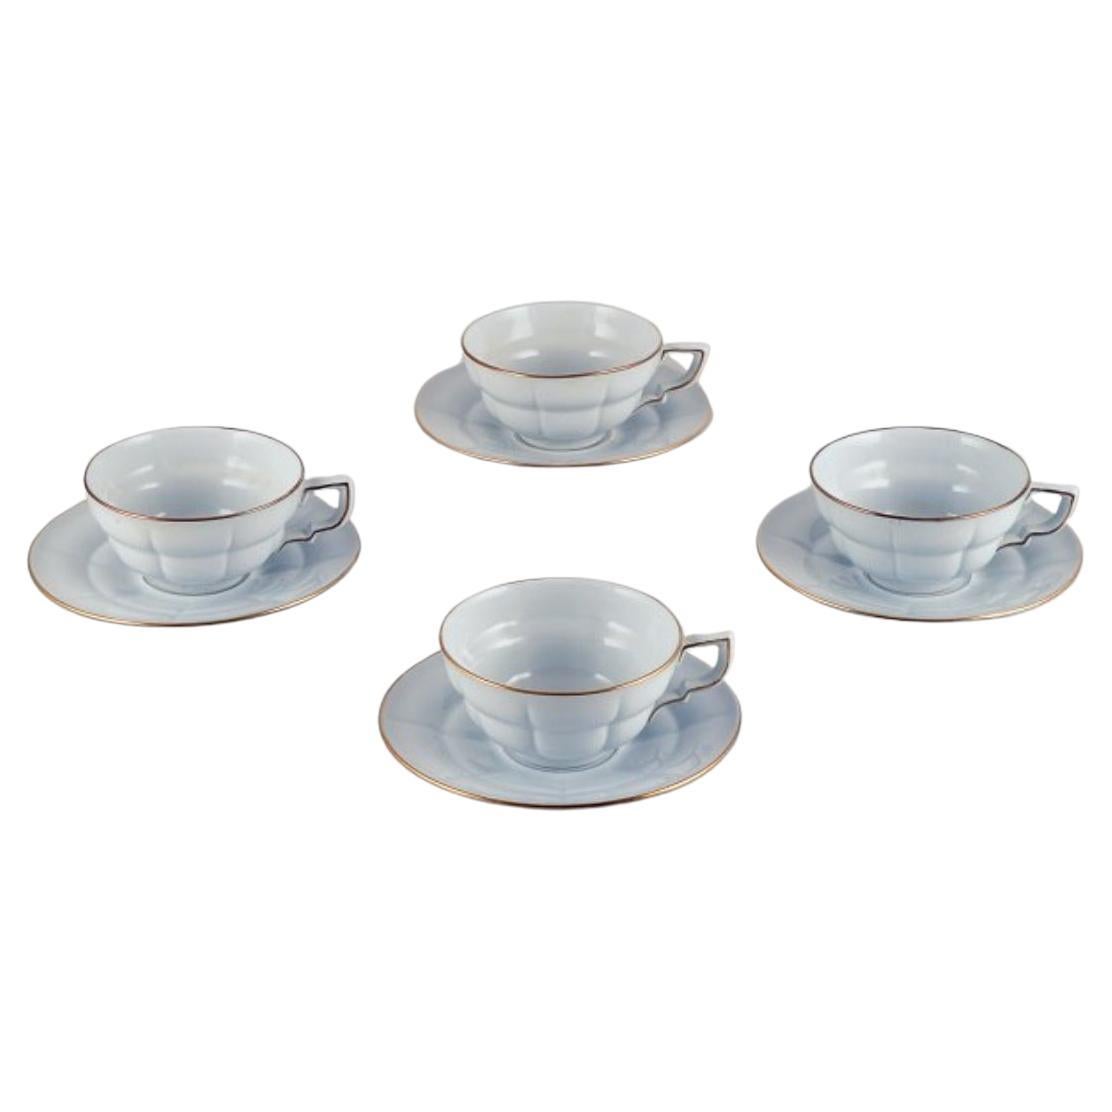 Gefle, Sweden. Set of four "Grand" Art Deco teacups with matching saucers. 